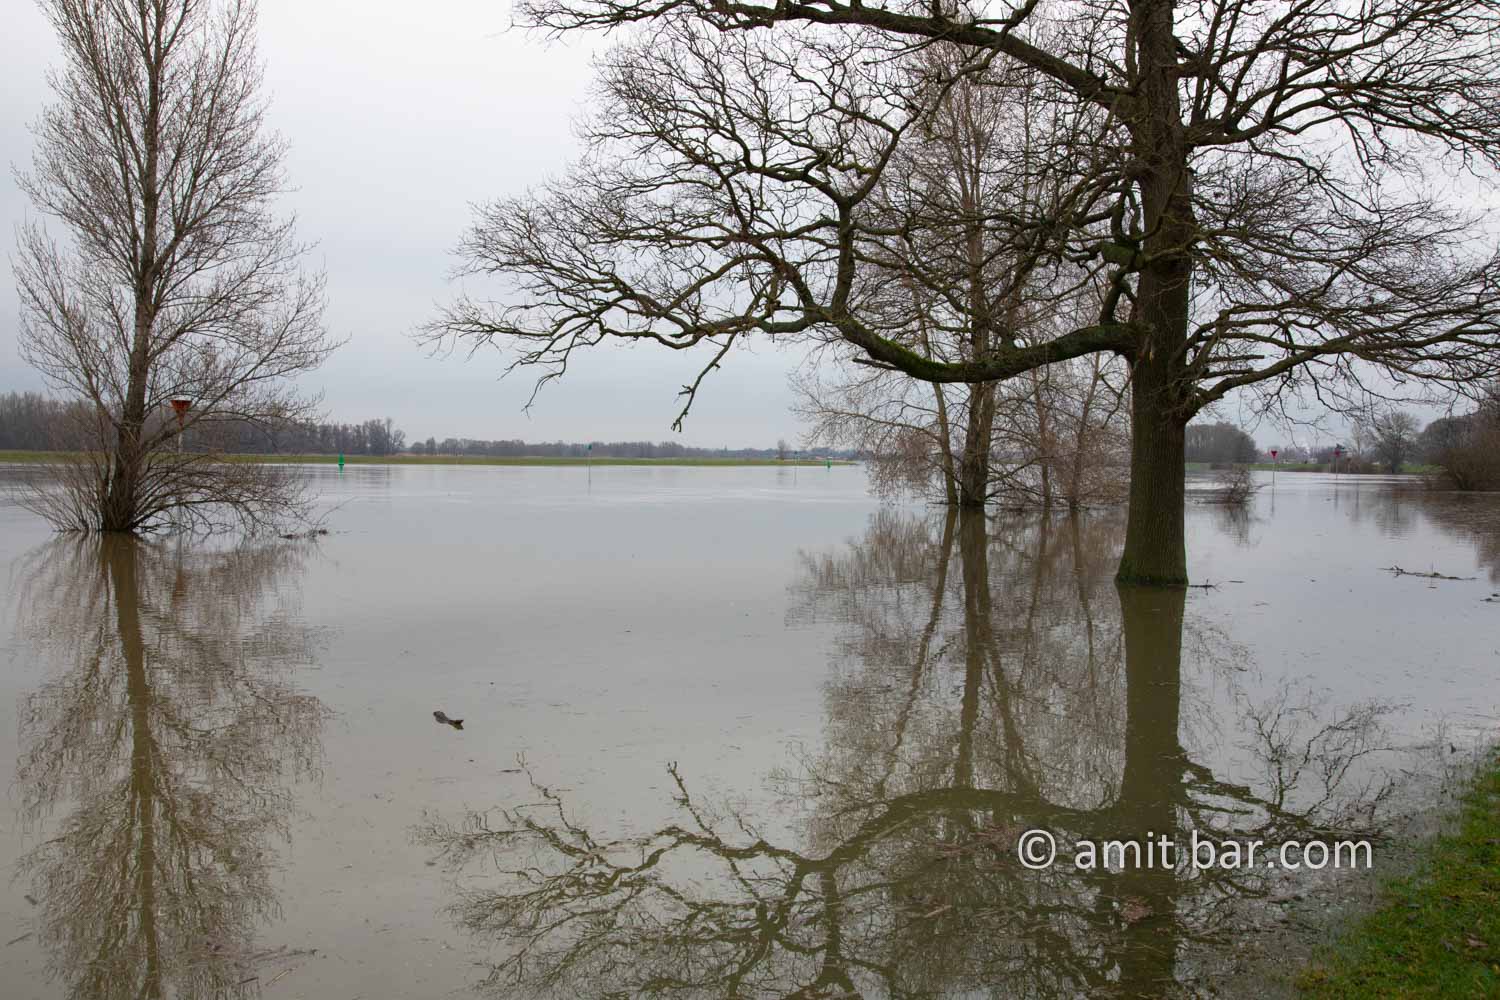 High water IJssel river I: Lots of rain in the Alps and Germany leads plenty of water to the rivers in The Netherlands. like the IJssel by Doesburg